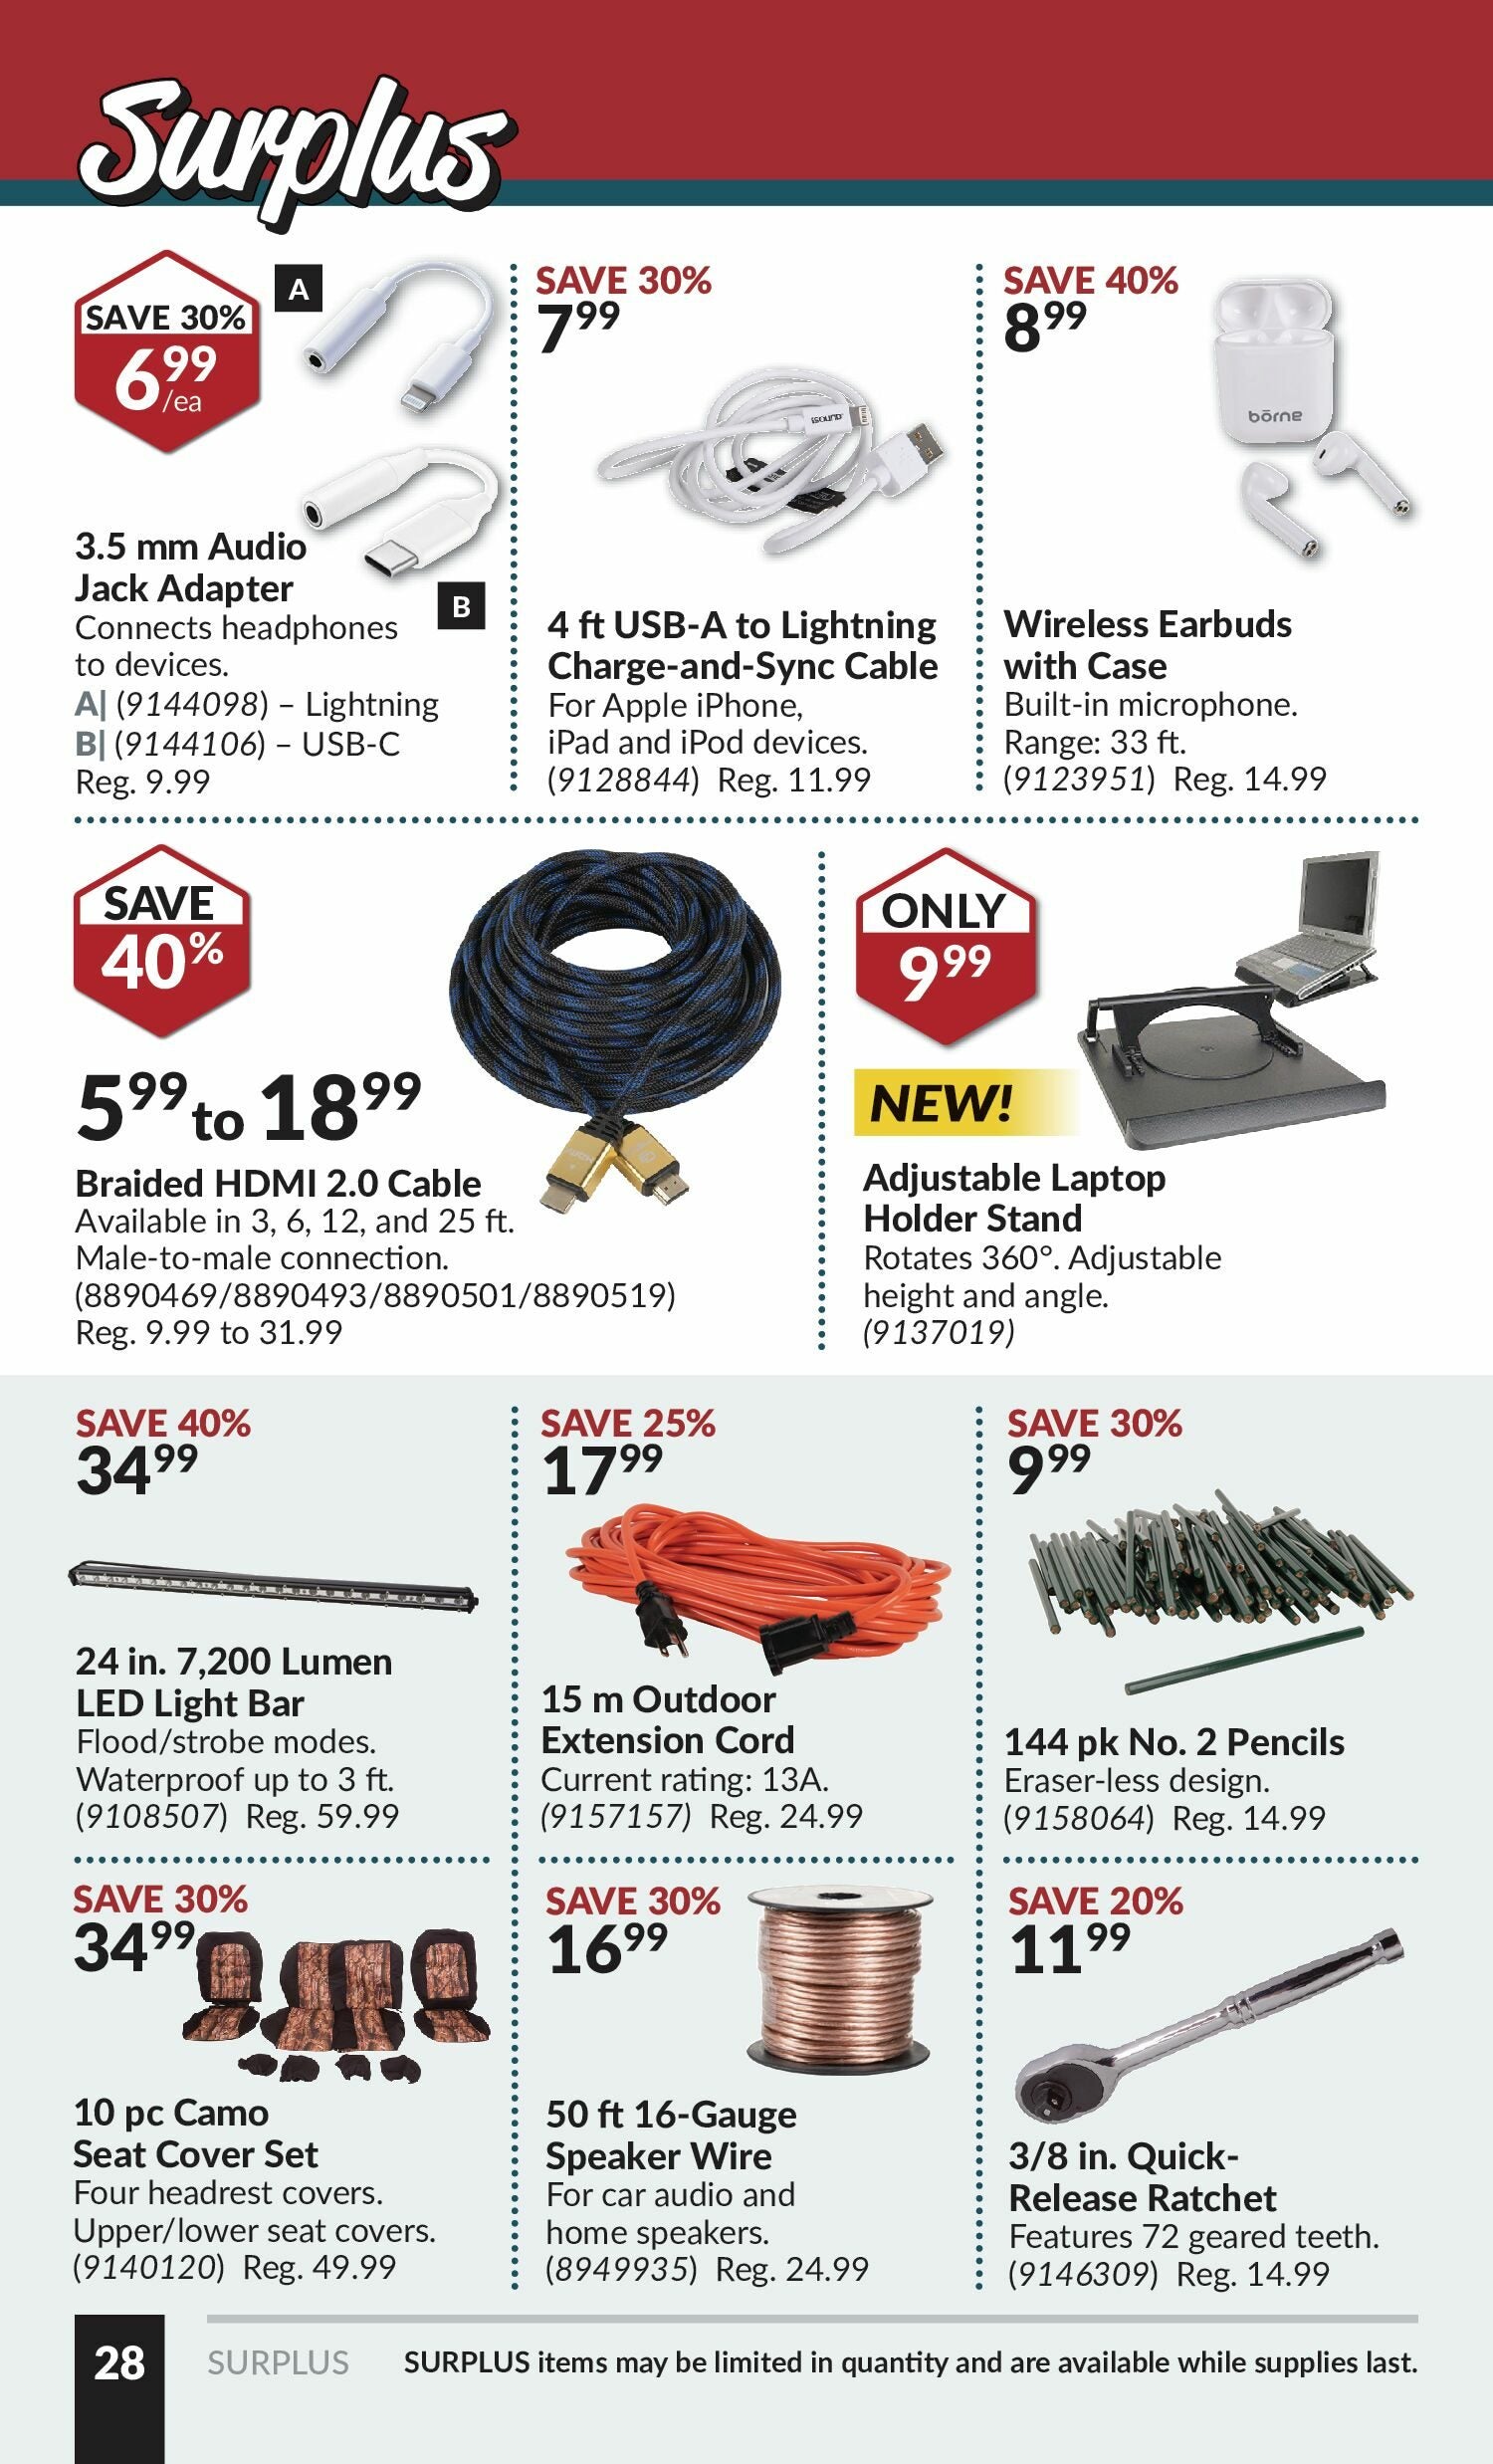 Princess Auto Weekly Flyer - 2 Week Sale - Clean Up on Great Deals - Aug 15  – 27 